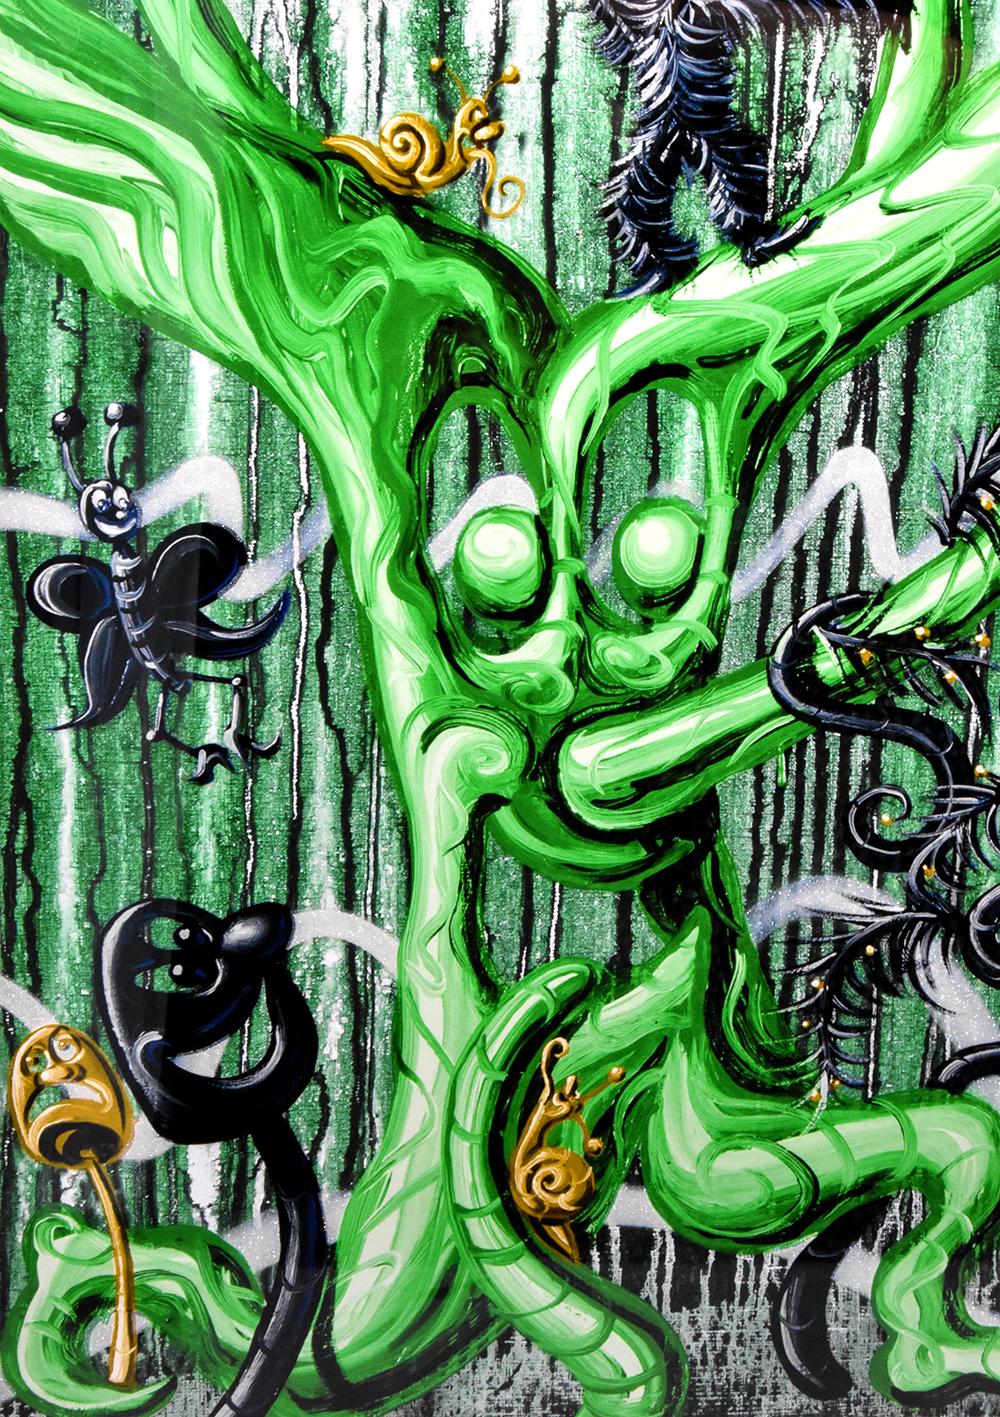 Kenny Scharf Furungle 4, 2021 is a vibrant and whimsical composition rendered in tones of yellow, green and black. In the foreground, an enchanted tree sits on the left side of the composition looking forward towards the scene before him. Rendered